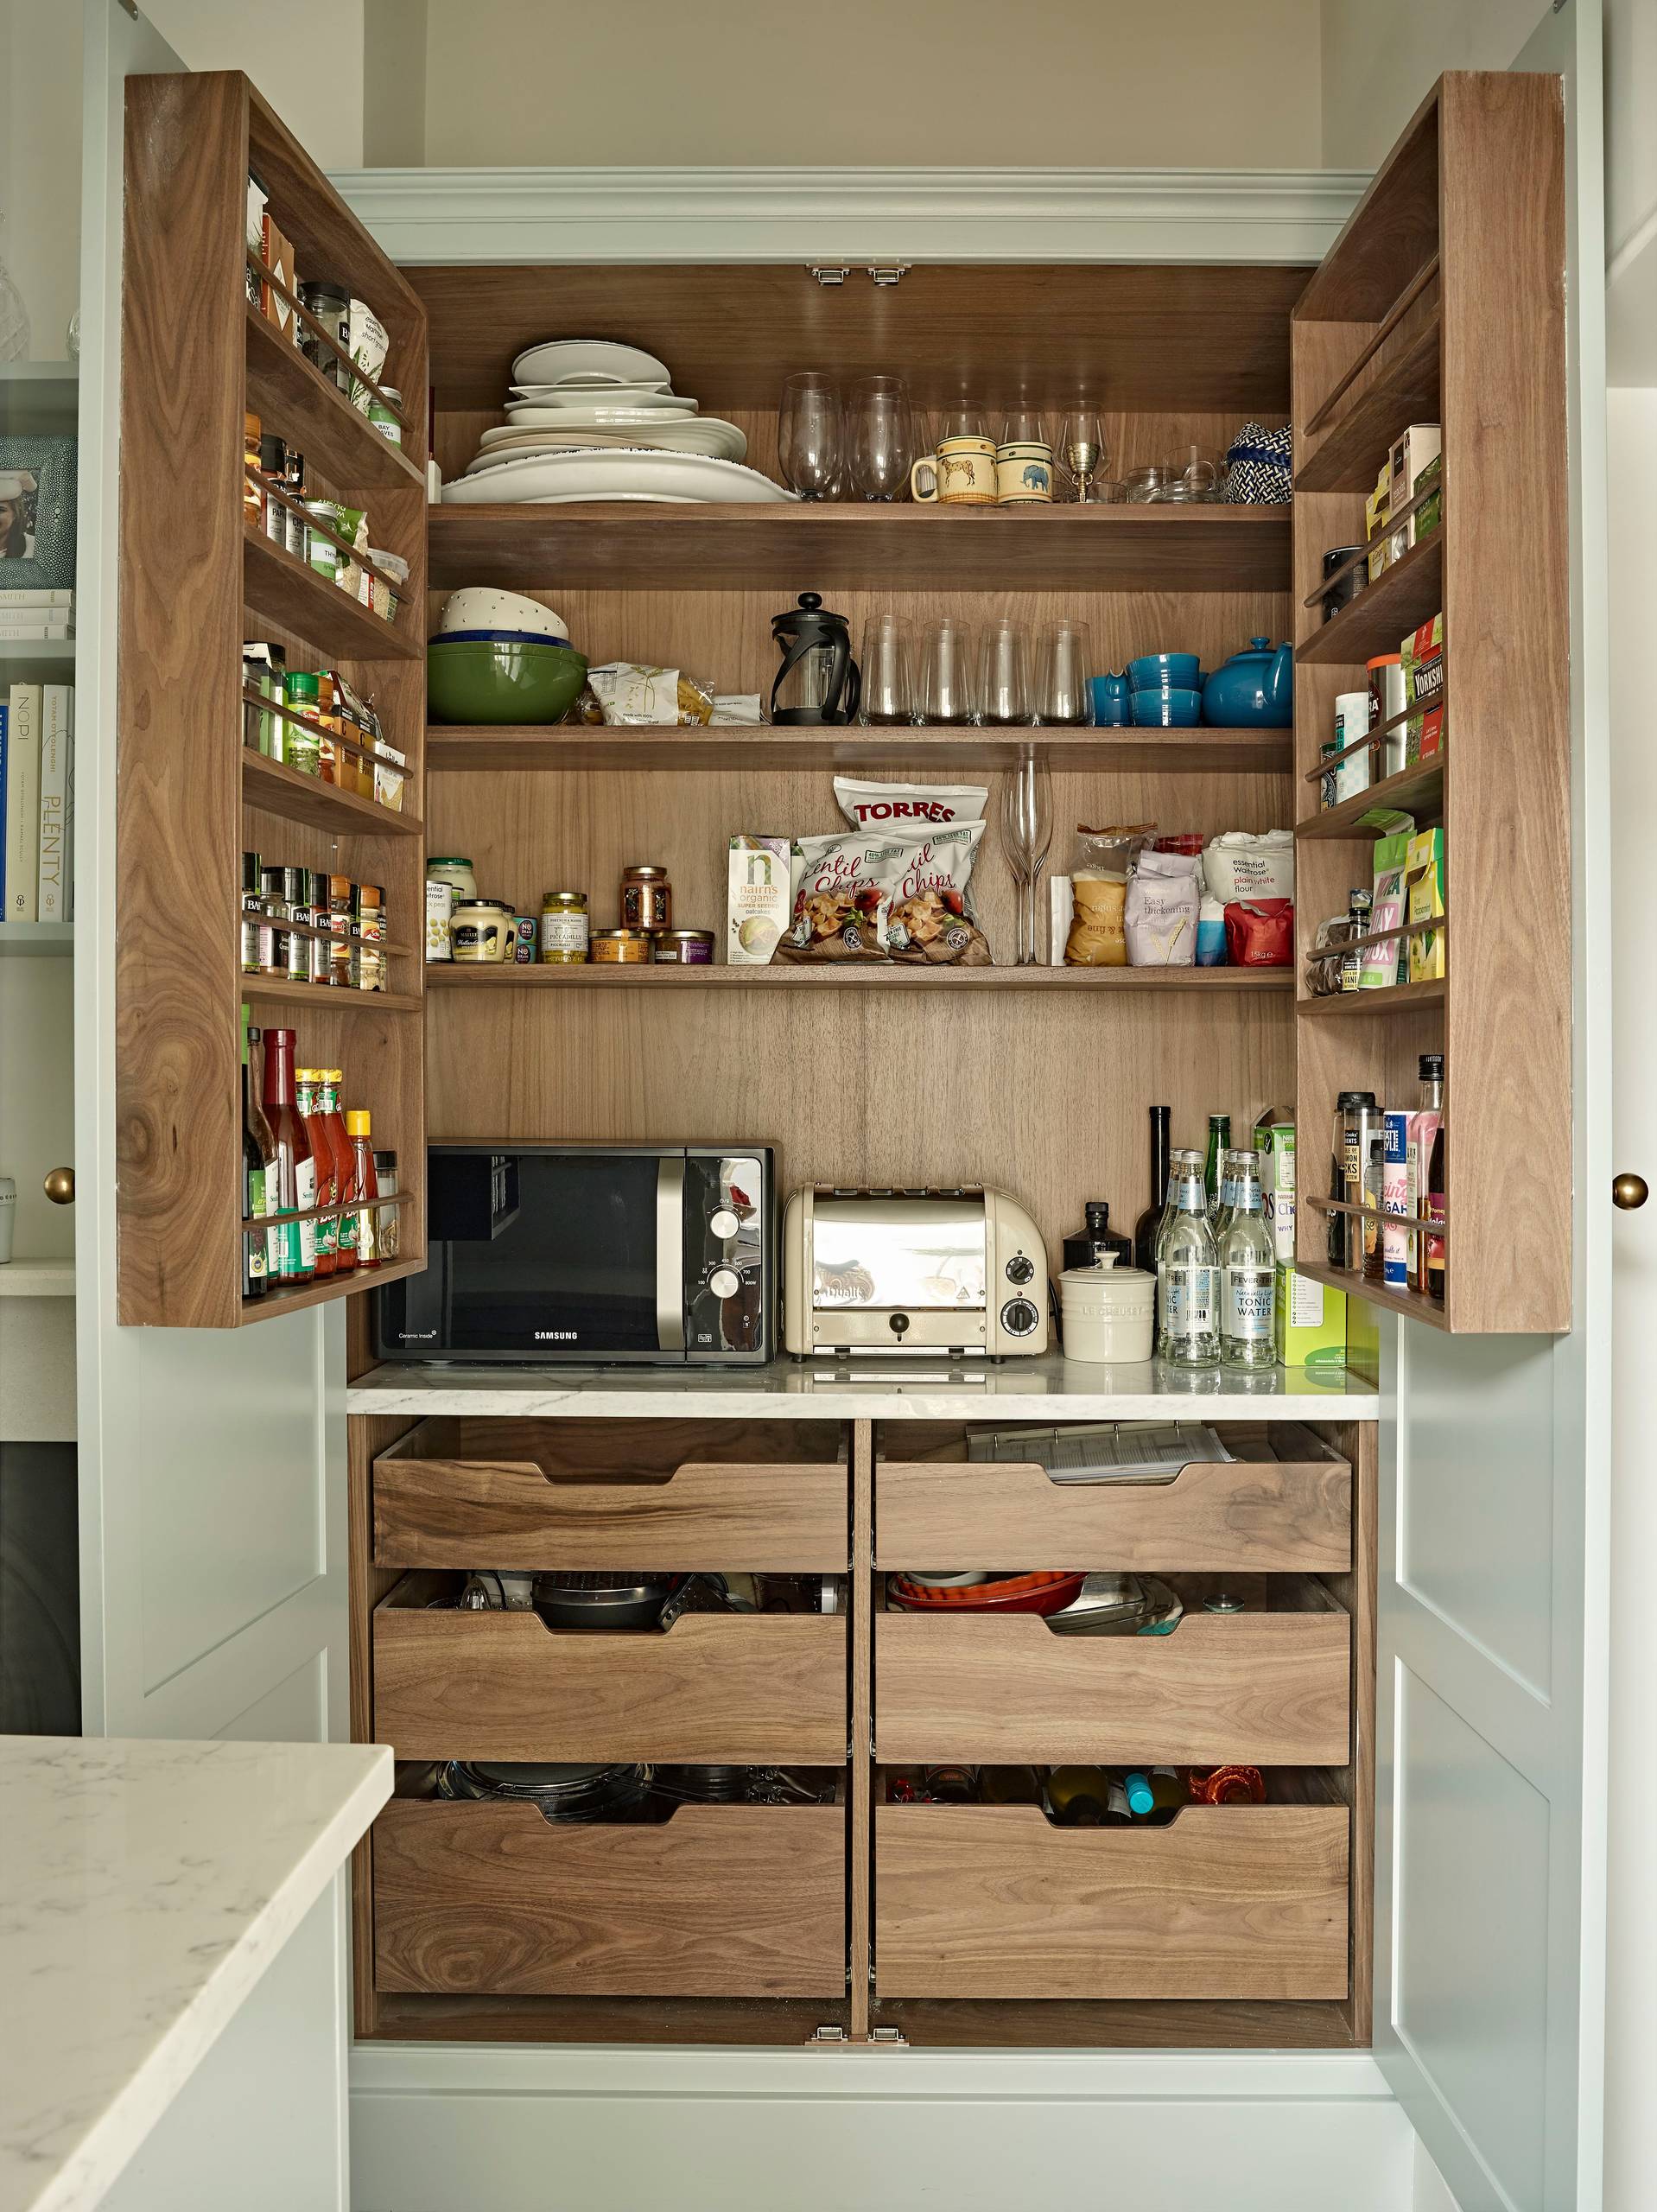 Small Pantry Ideas: 7 Space-saving Designs For Any Kitchen